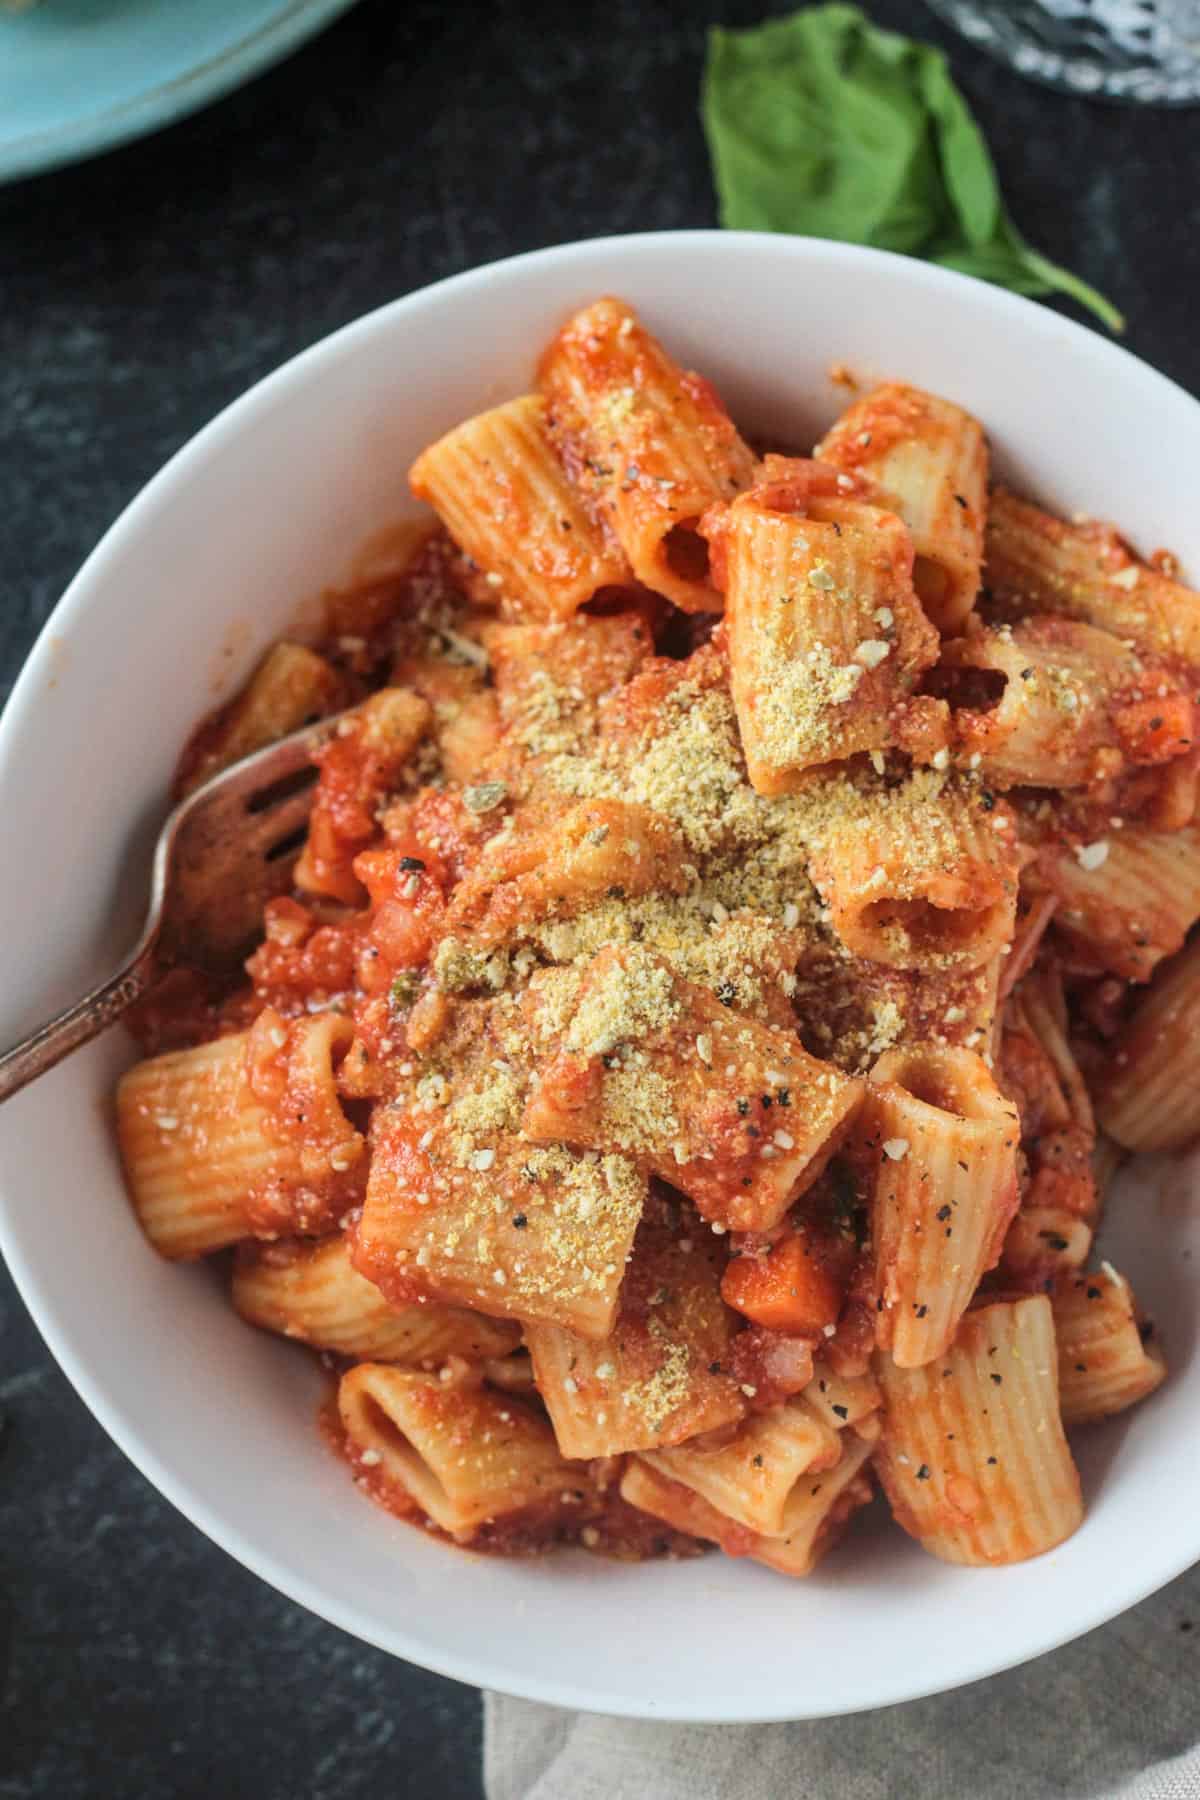 Parmesan cheese sprinkled over a bowl of pasta bolognese.